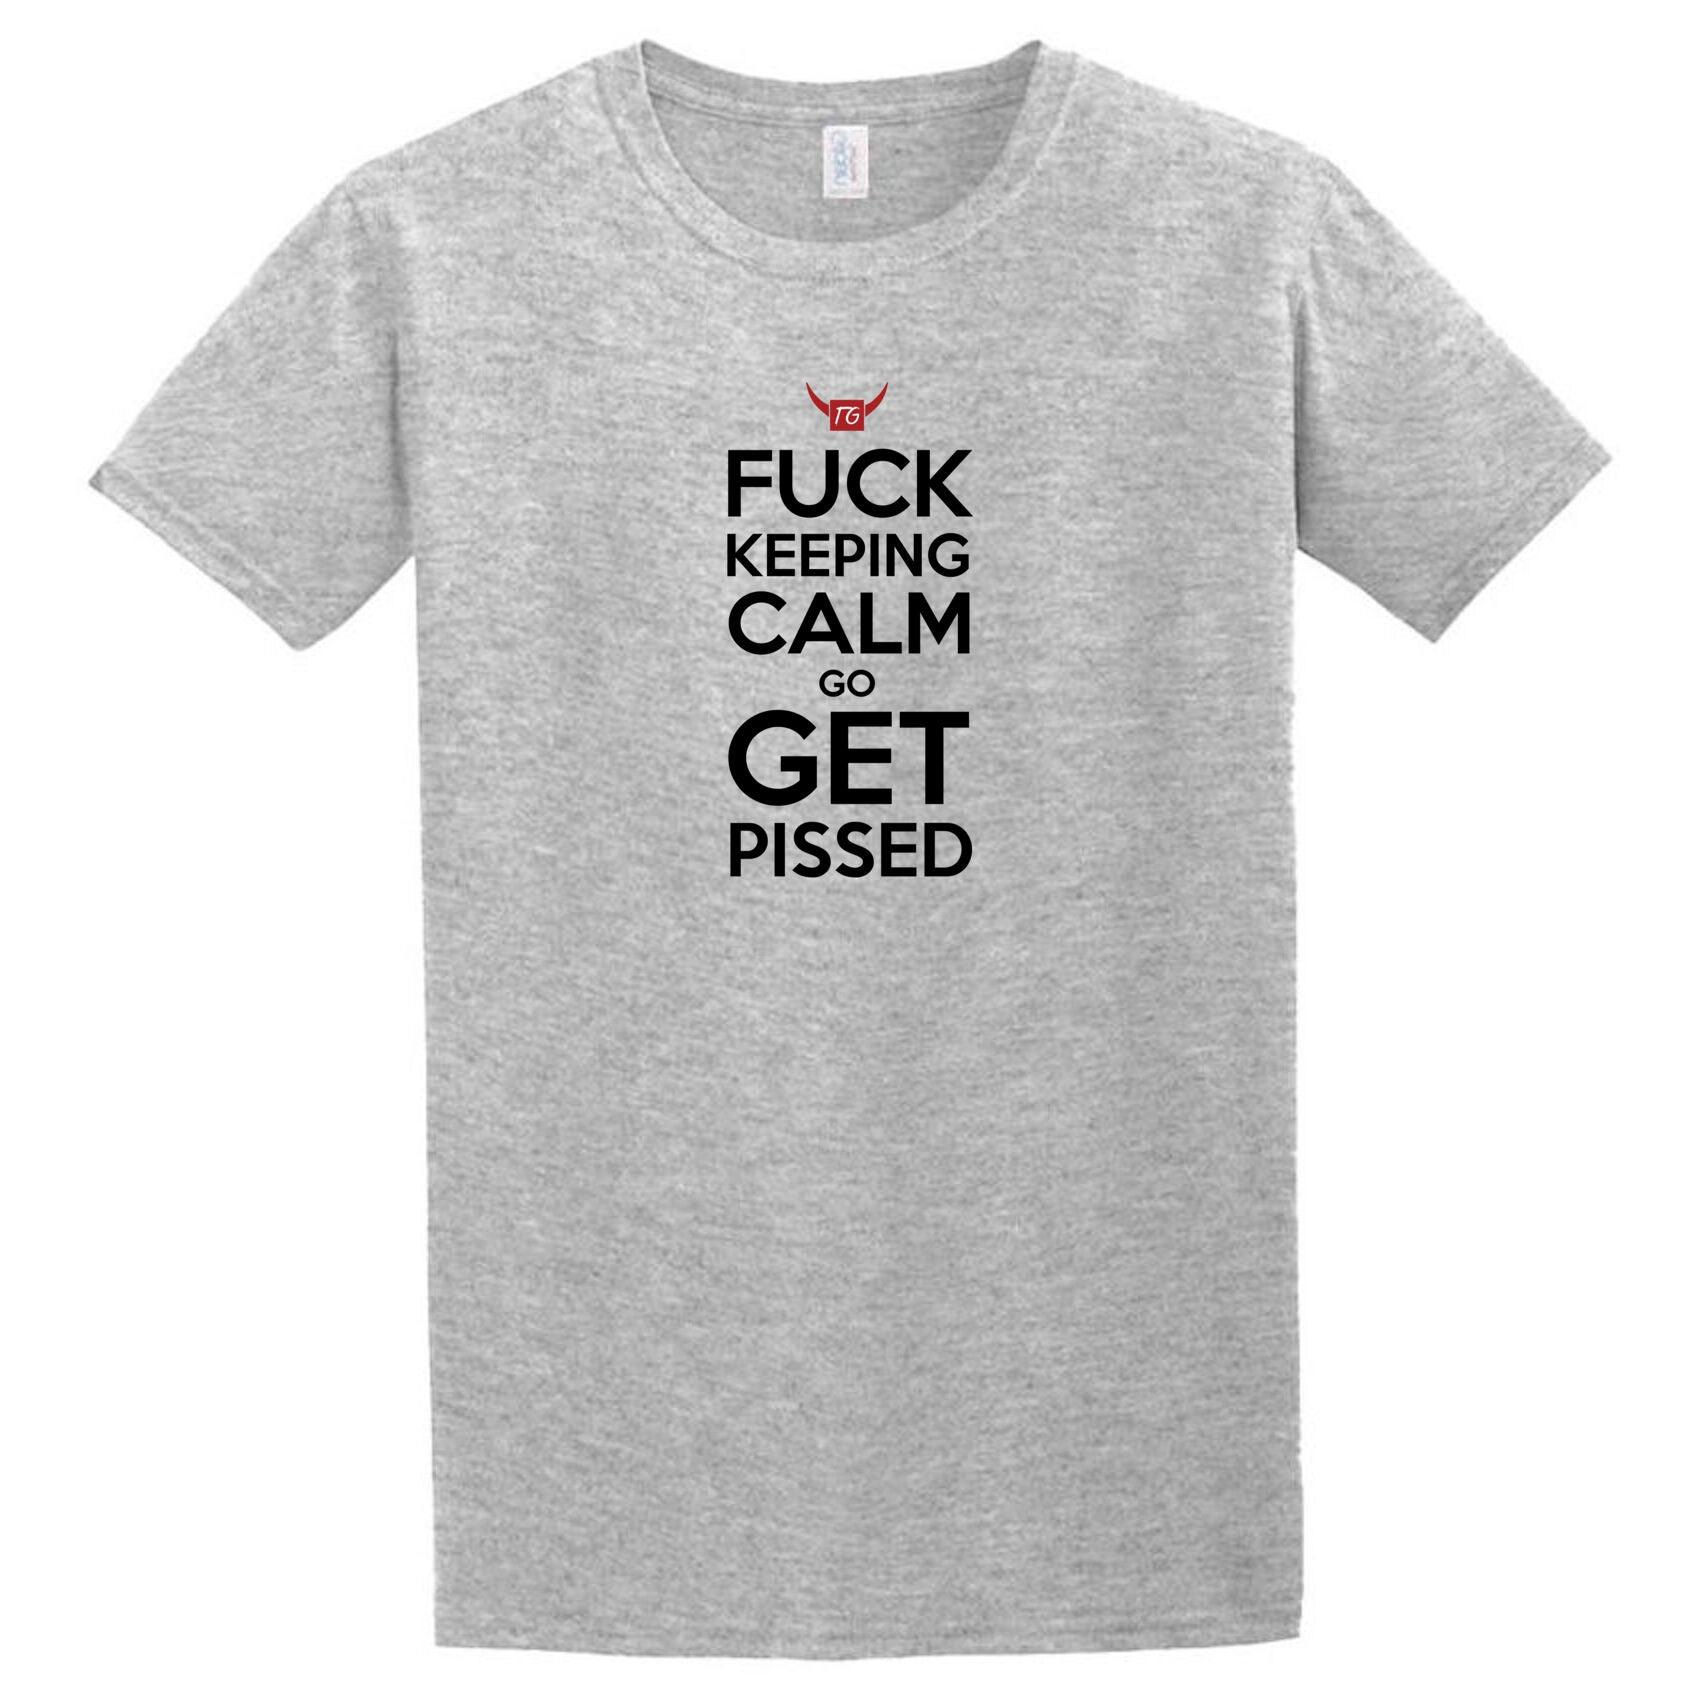 A Twisted Gifts Get Pissed T-Shirt that says fuck keeping calm.